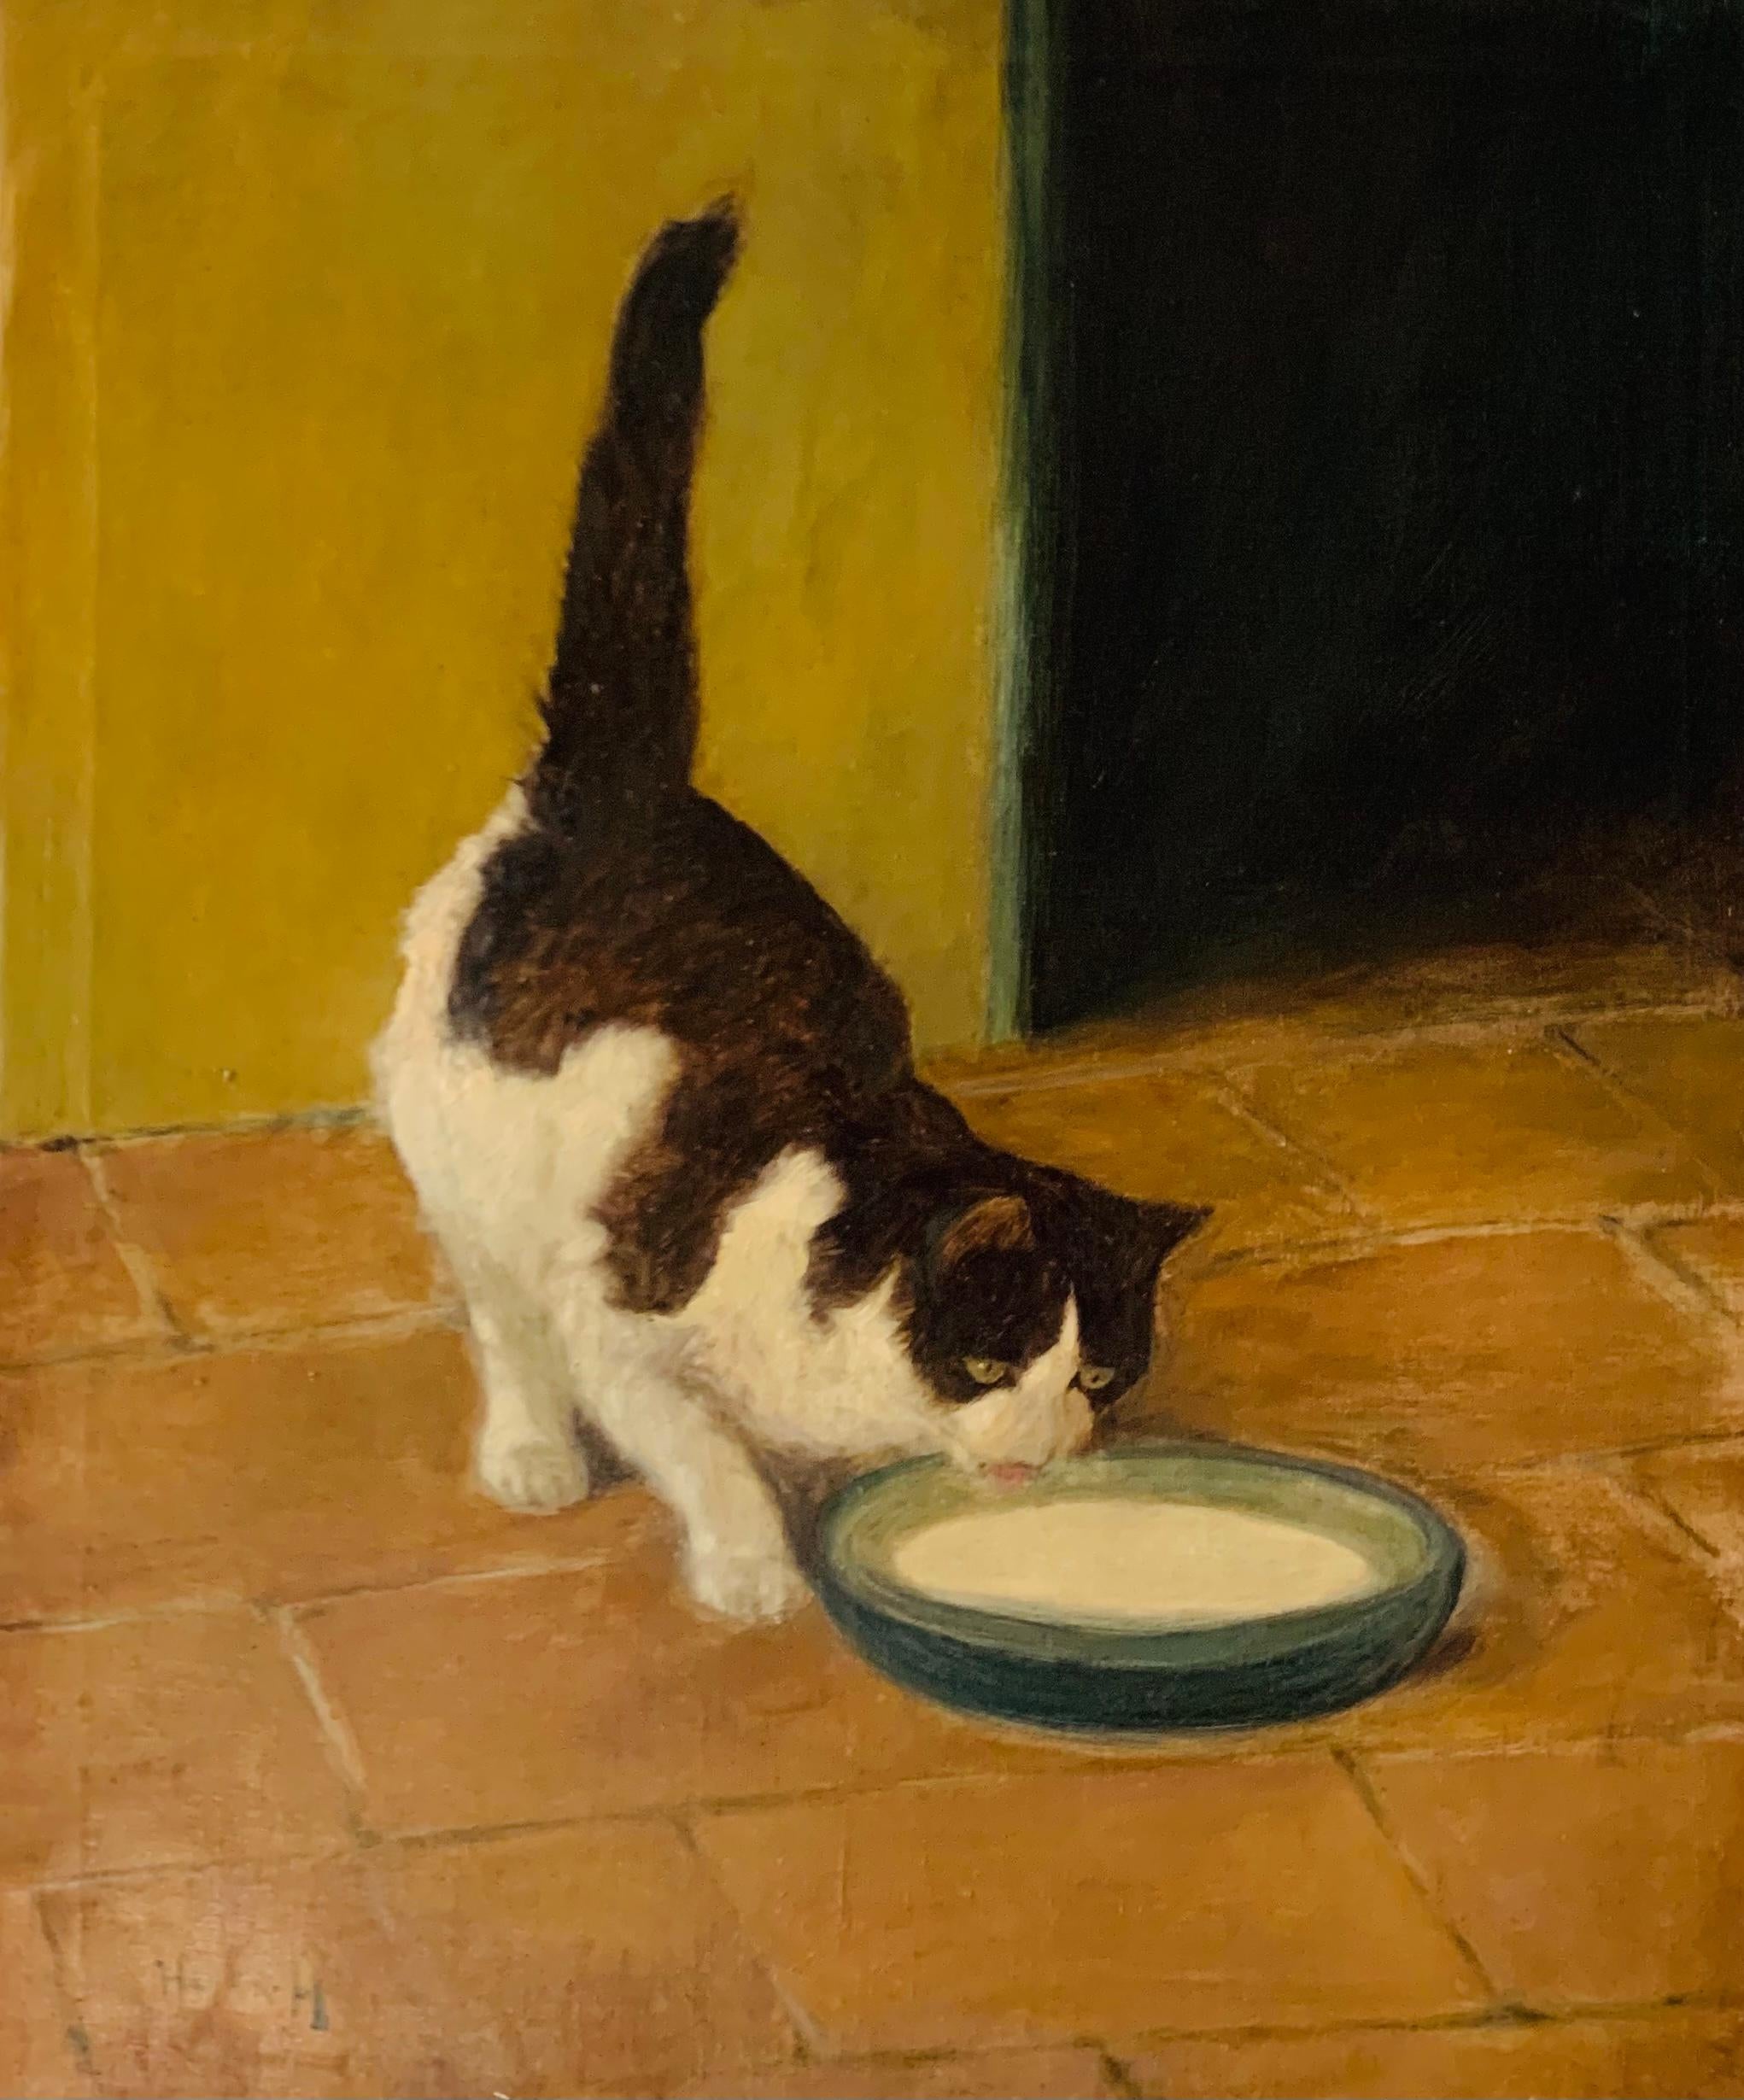 Brown and White Cat Drinking Milk From a Bowl - Painting by Arthur Heyer